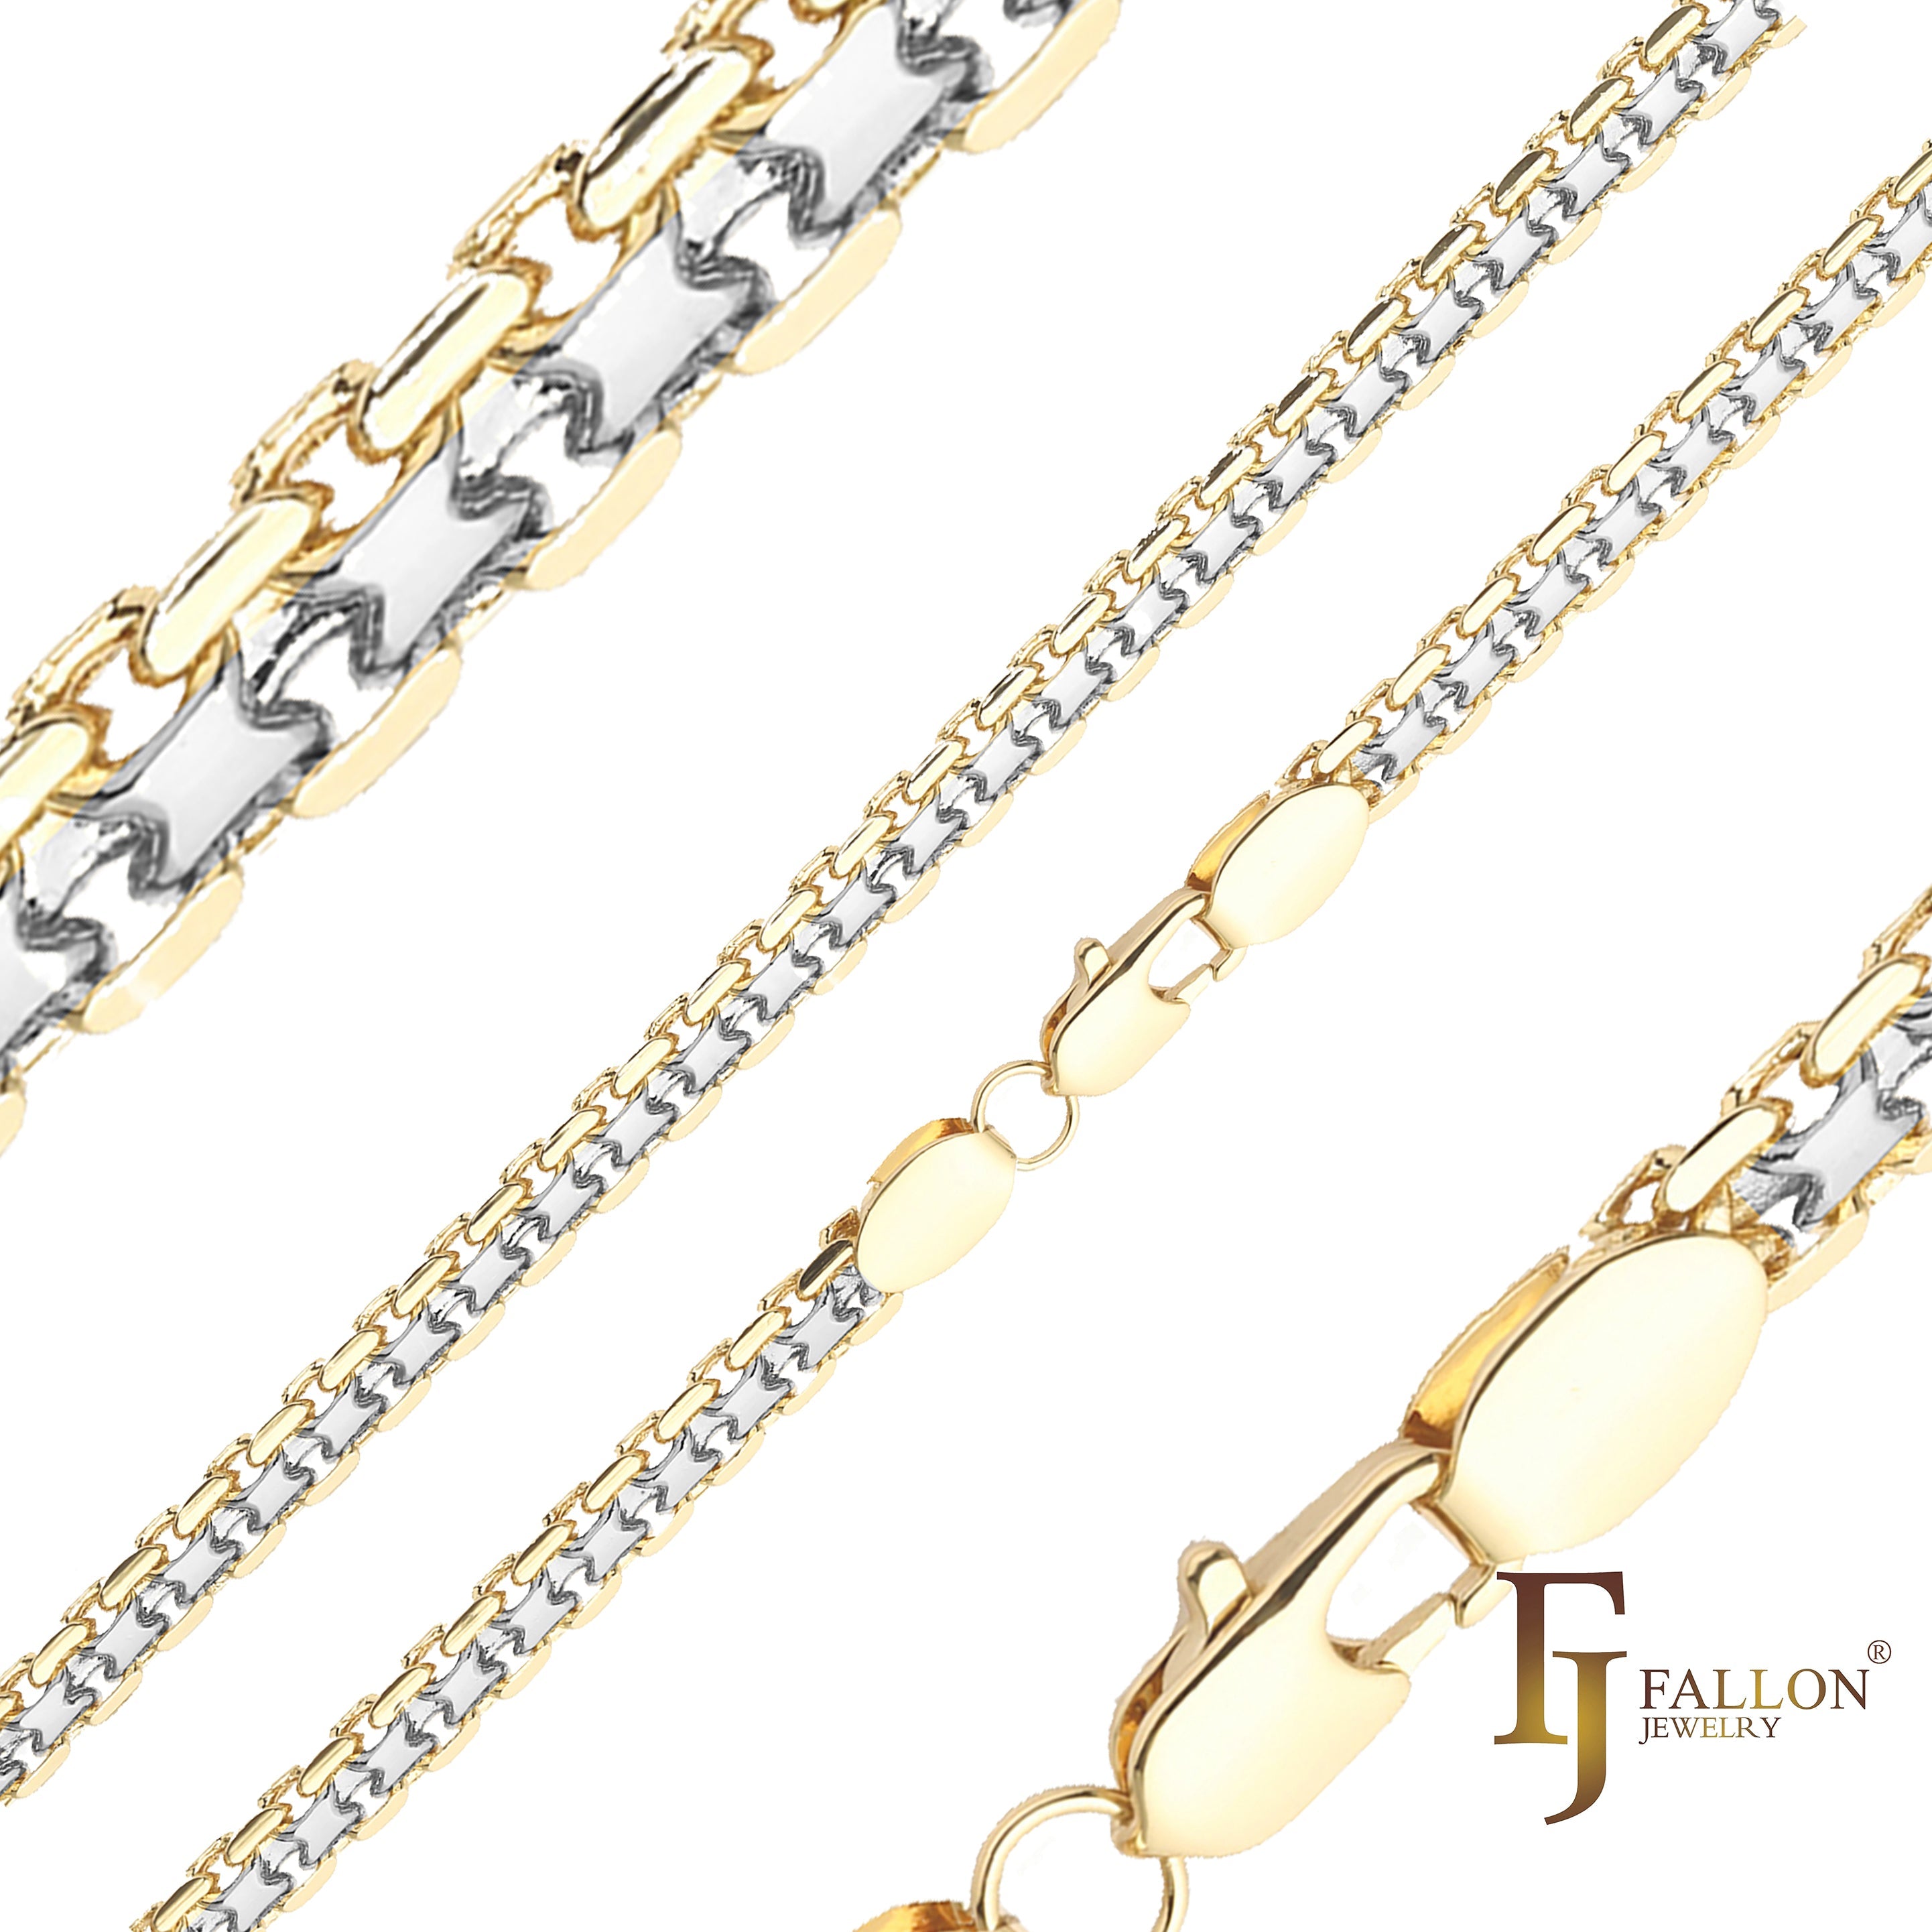 .Bismarck weaving anchor double link chains plated in 14K Gold, 18K Gold, two tone